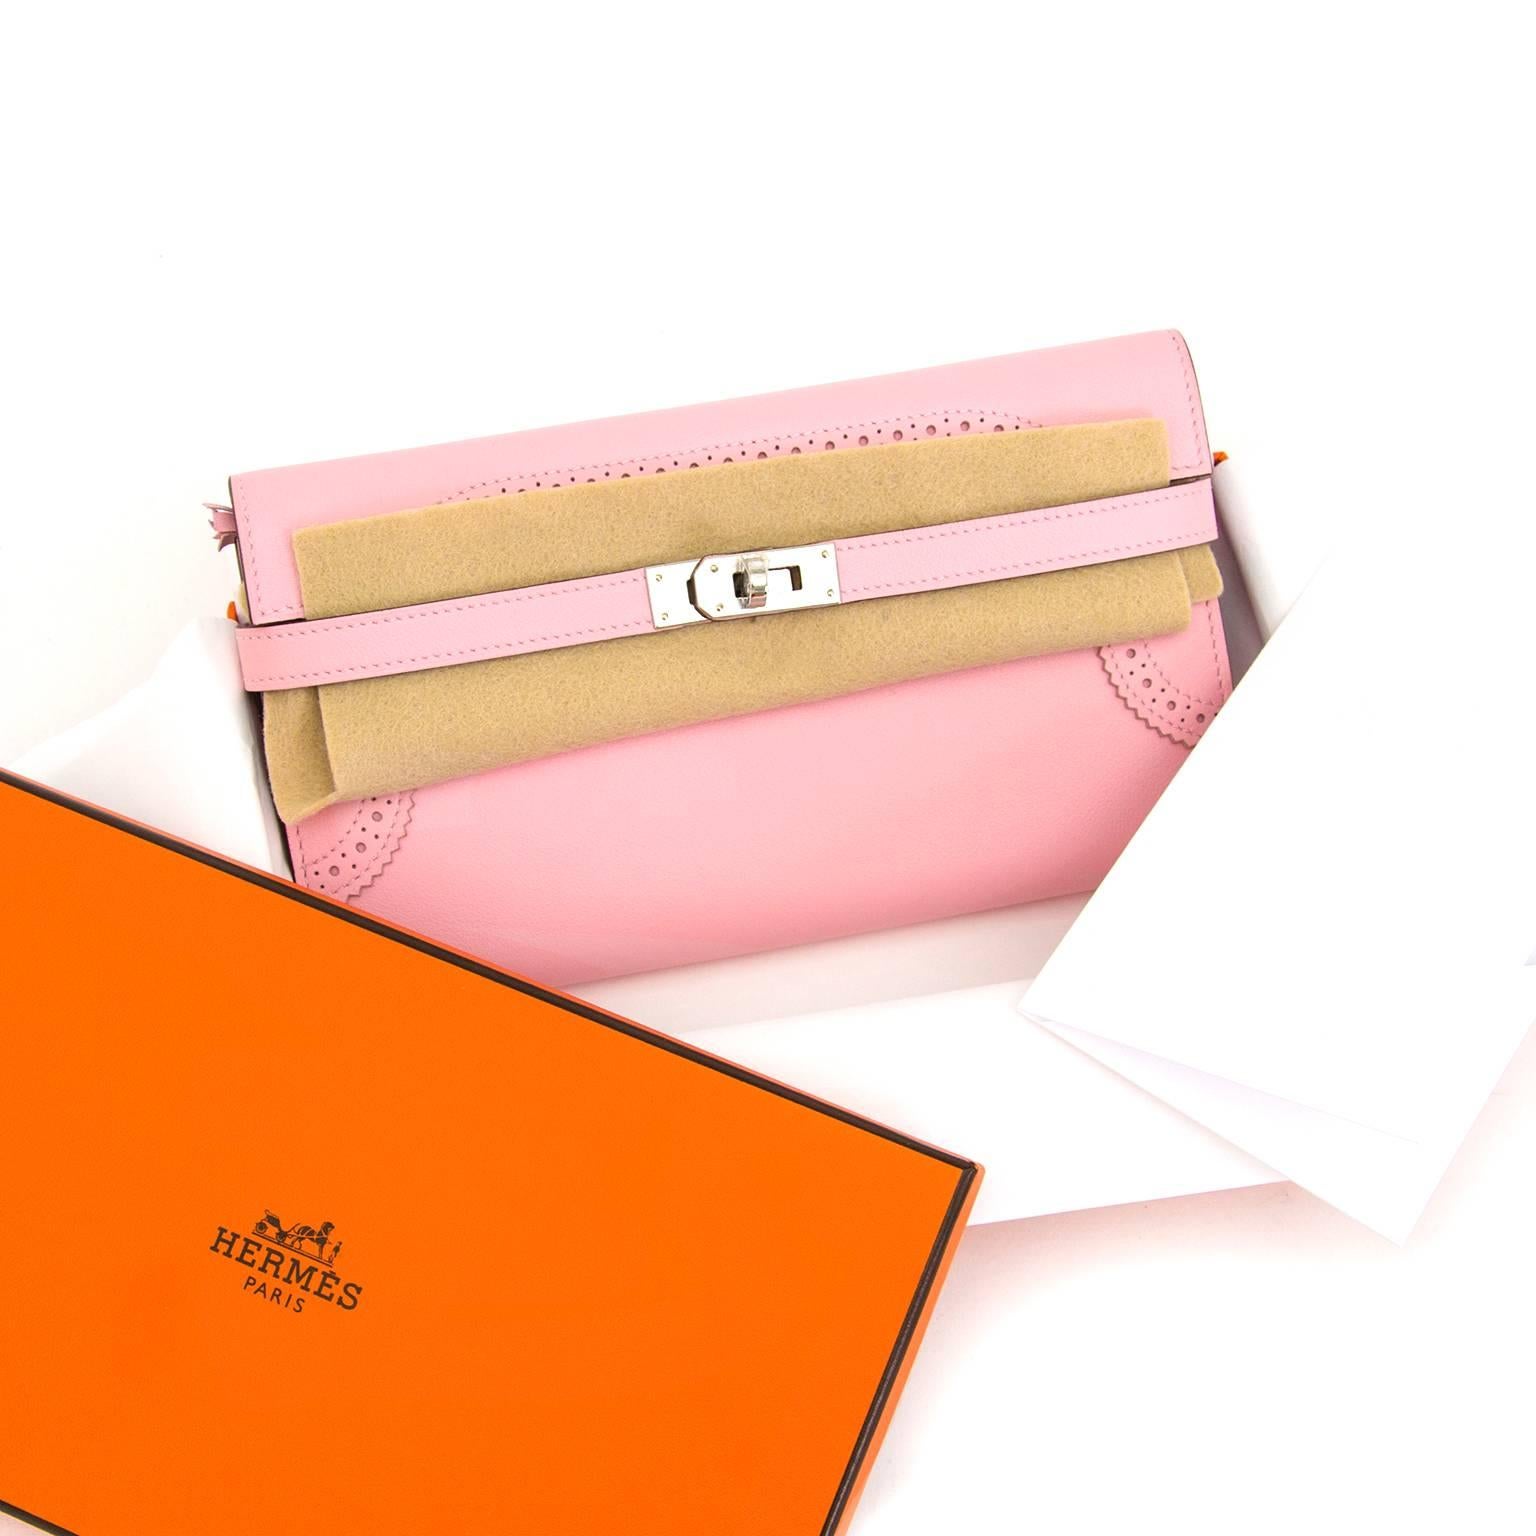 Stunning Hermès wallet. This Kelly wallet is handcrafted from veau swift, dyed in the beatiful 'Rose Classique' color a soft baby pink hue.
STORE FRESH
Comes with:
- original dustbag
- receipt (2016)
- plastics on hardware